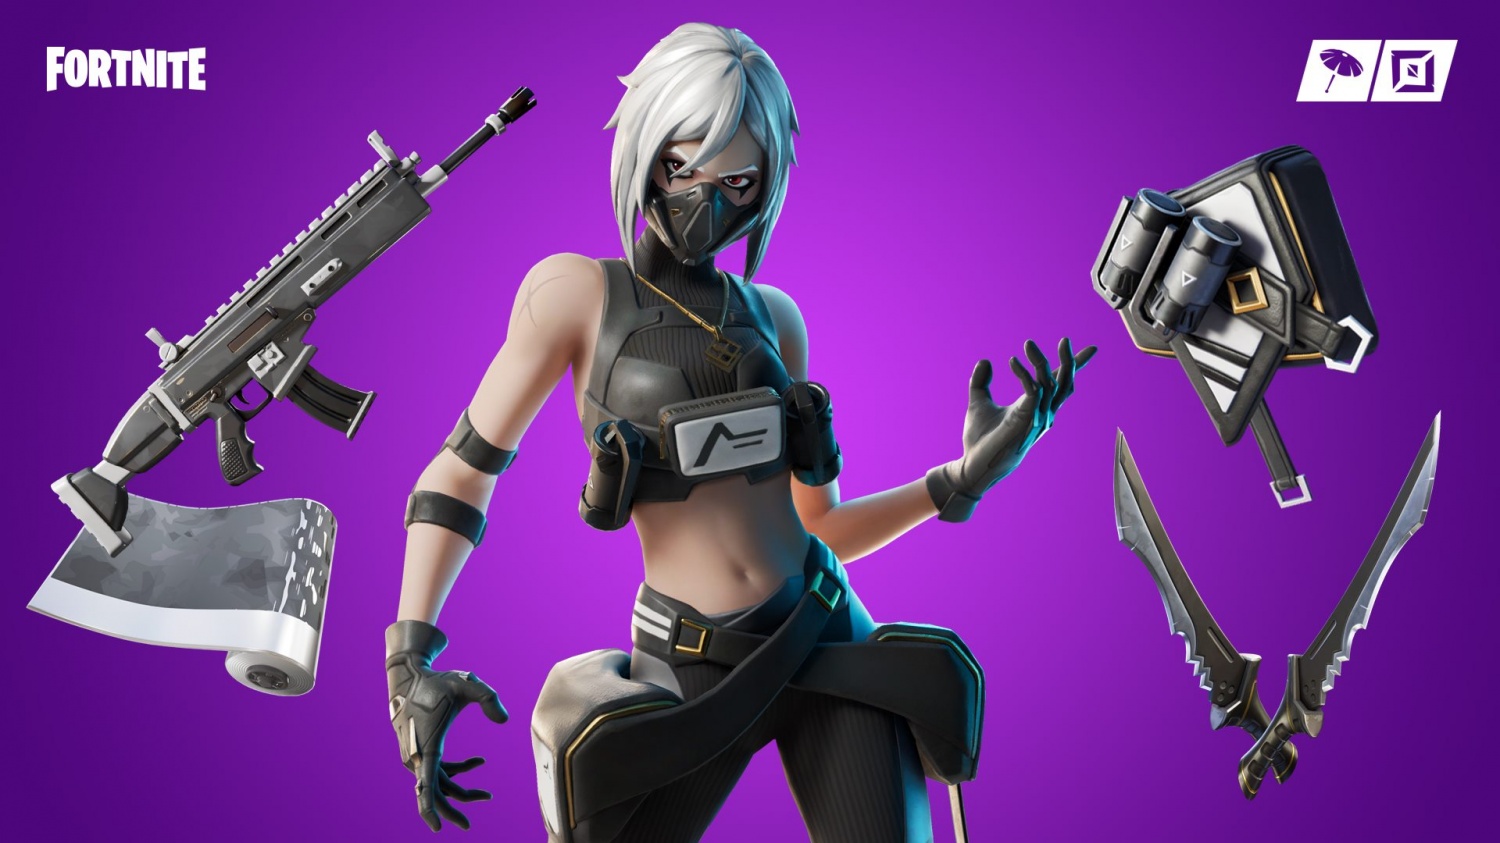 'Fortnite' Chapter 2 Guide: Stretch Goals Challenges Revealed, Plus New 'Star Wars' Skins